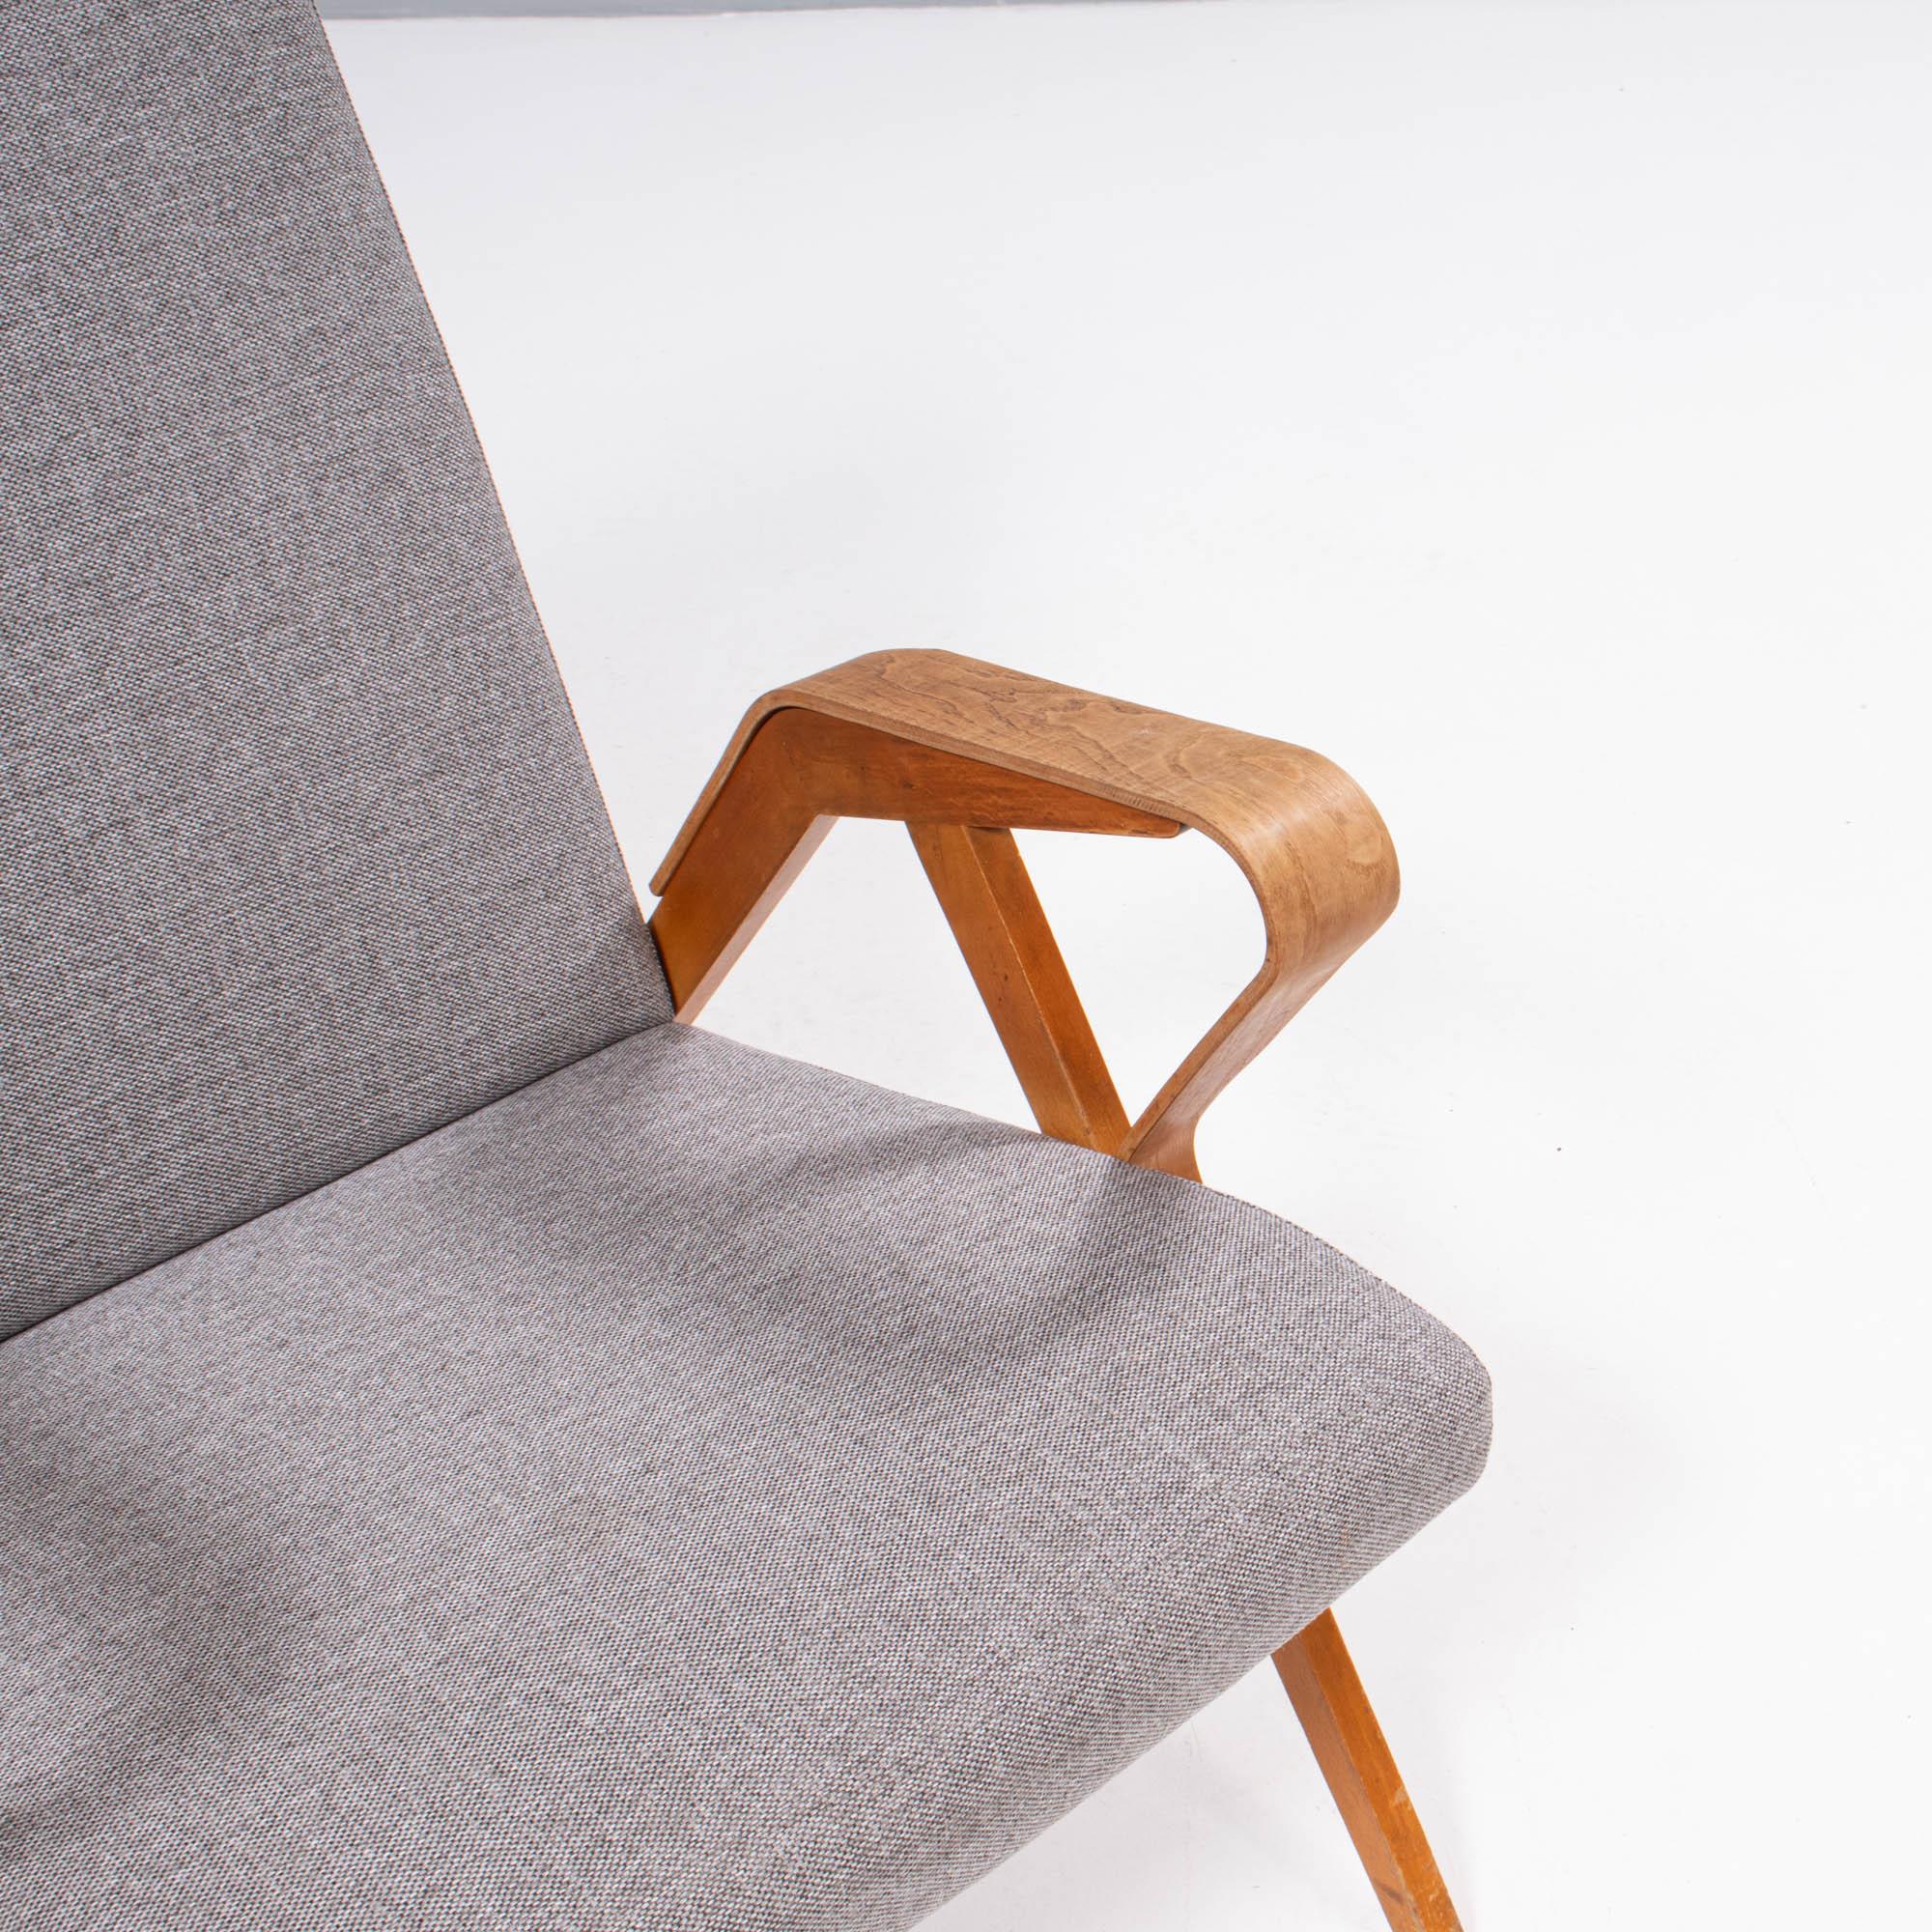 Designed by František Jirák for Tatra Nábytok, this No.24-23 chair is a fantastic example of mid century modern design.

Featuring bent plywood armrests which contrast the angular beech veneer frame, the armchair is upholstered in grey